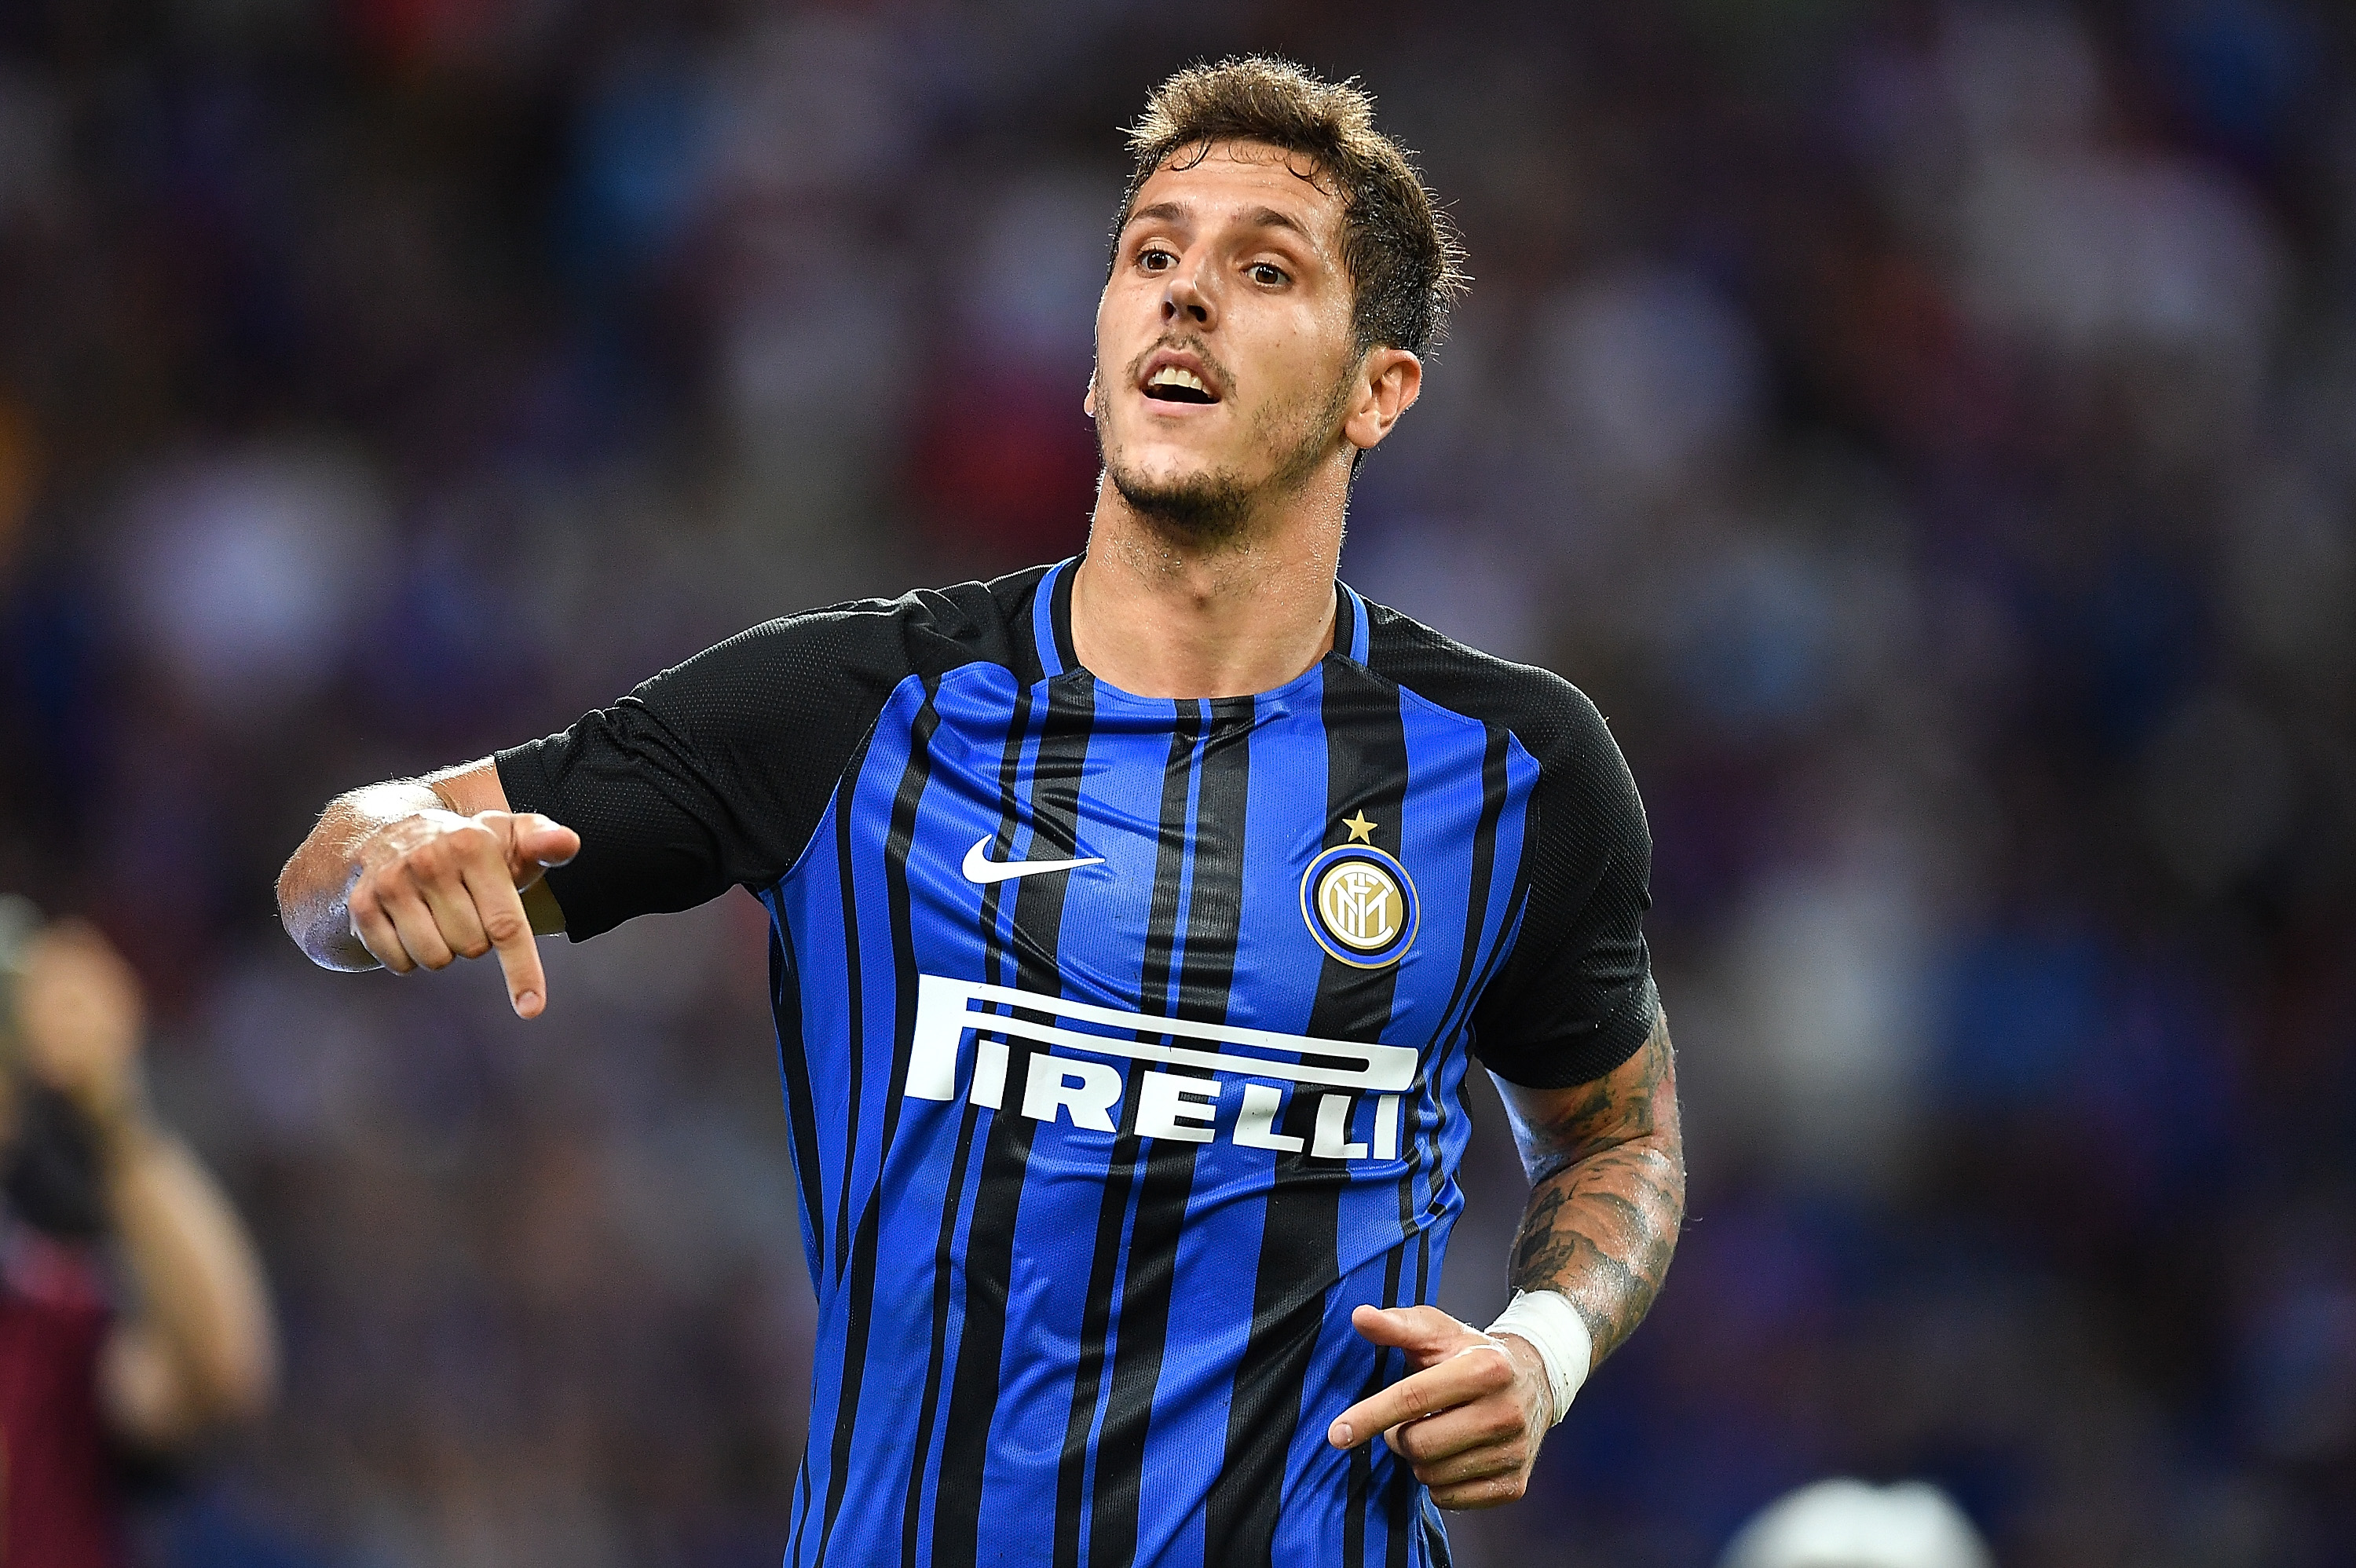 Ex-Inter & Fiorentina Forward Stevan Jovetic: “Inter Are A Great Team But Less Equipped Than Juventus”